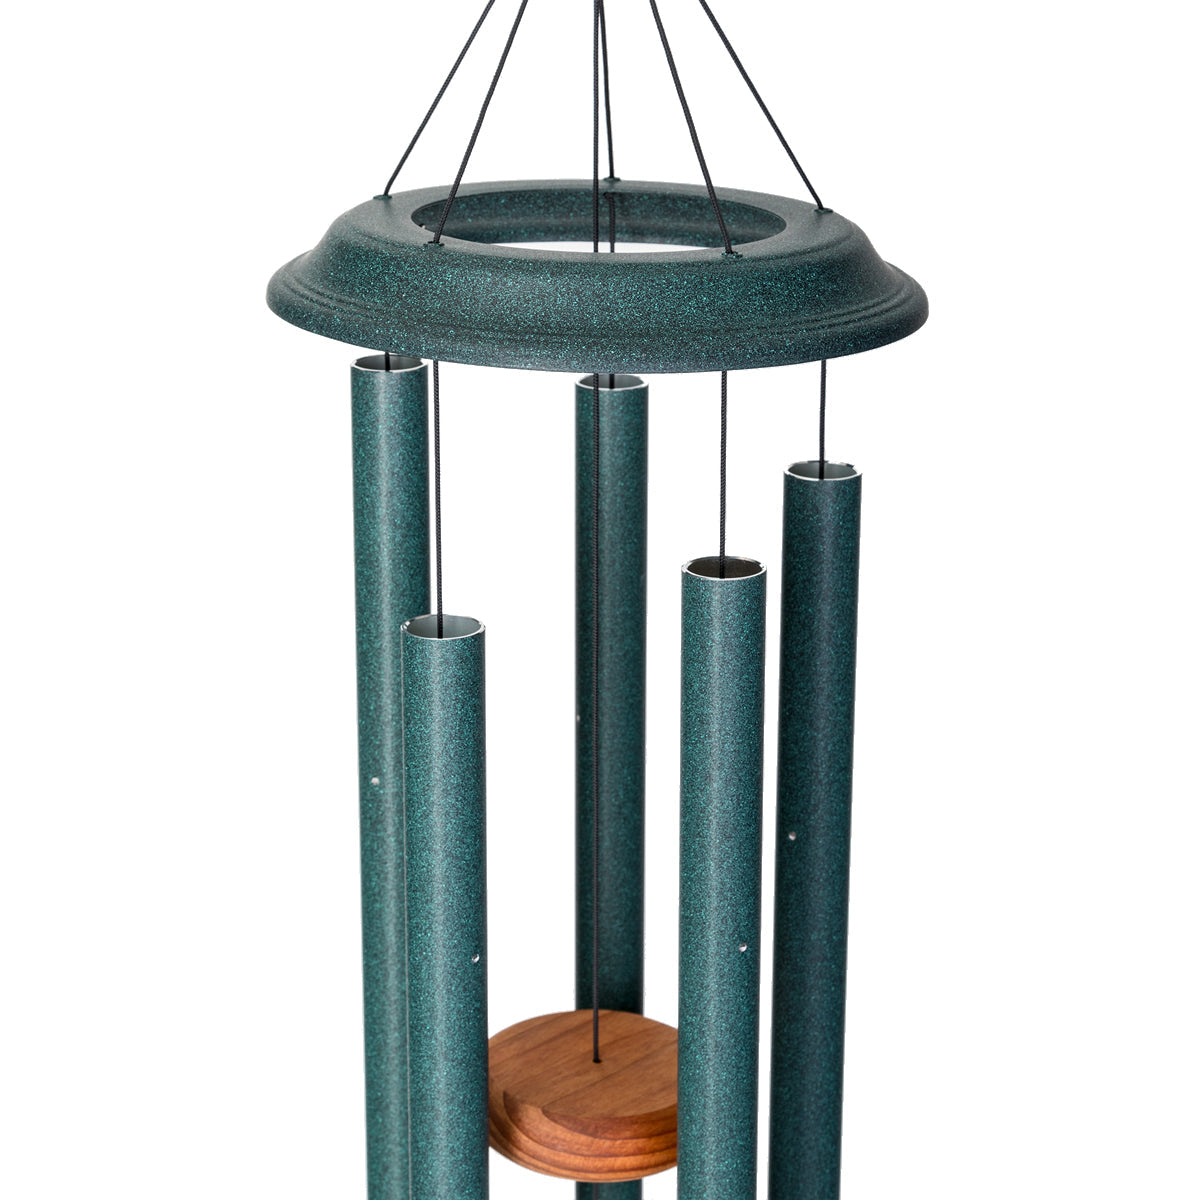 Shenandoah Melodies 35-inch Wind Chime - Green